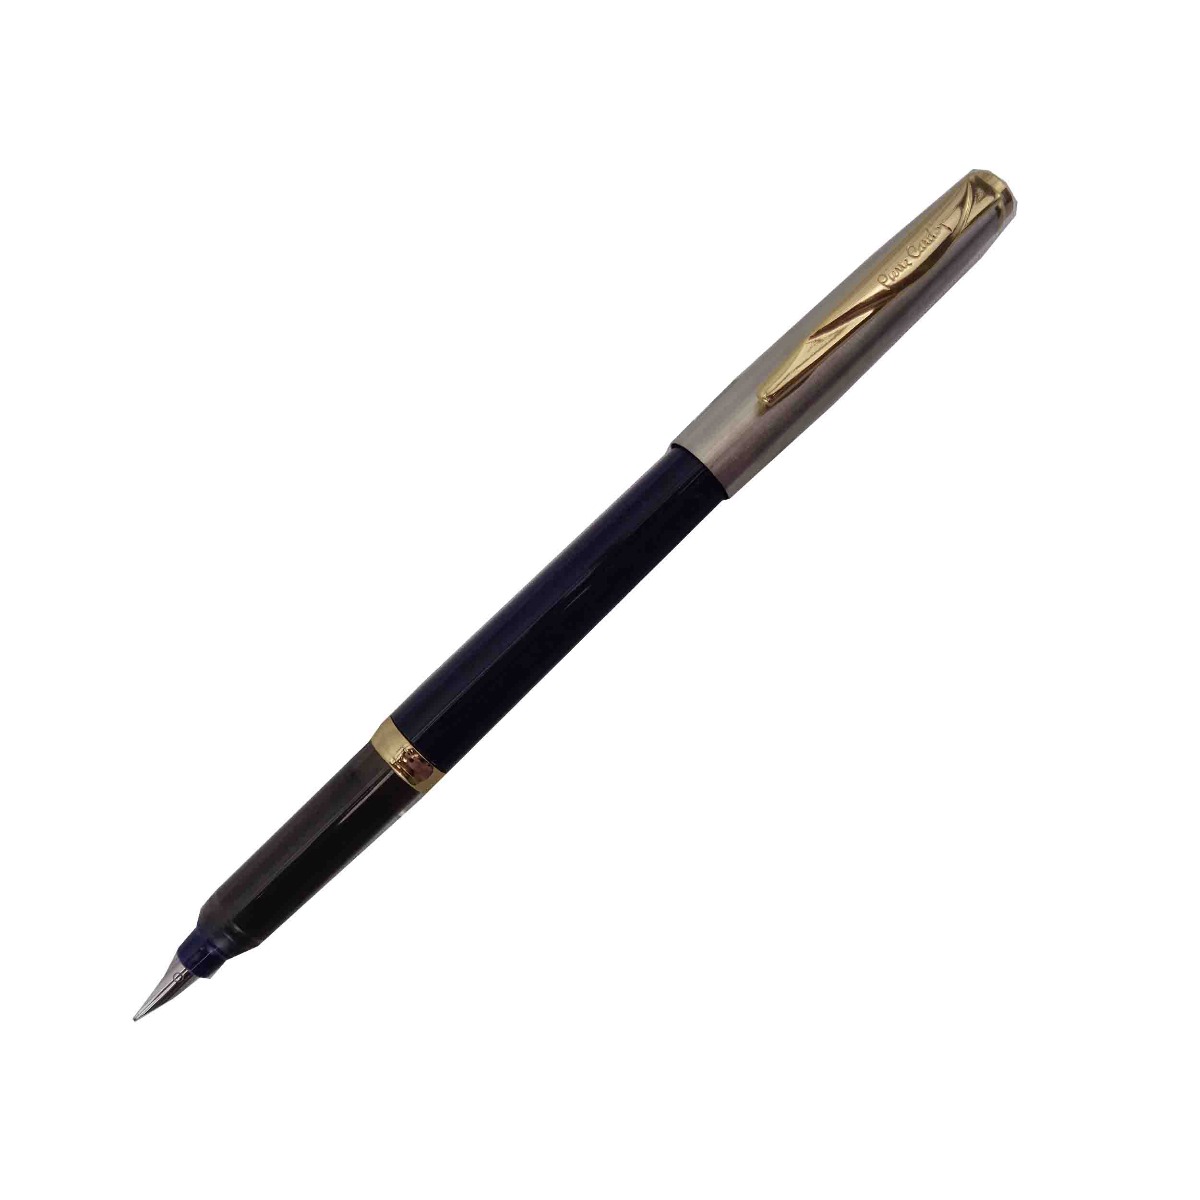 Pierre Cardin Momento Half GoldModel:15615 Dark Blue Color Body With Silver Cap Type Fine Nib With 1 Ink Converter and 2 Extra Long Catridge Fountain Pen